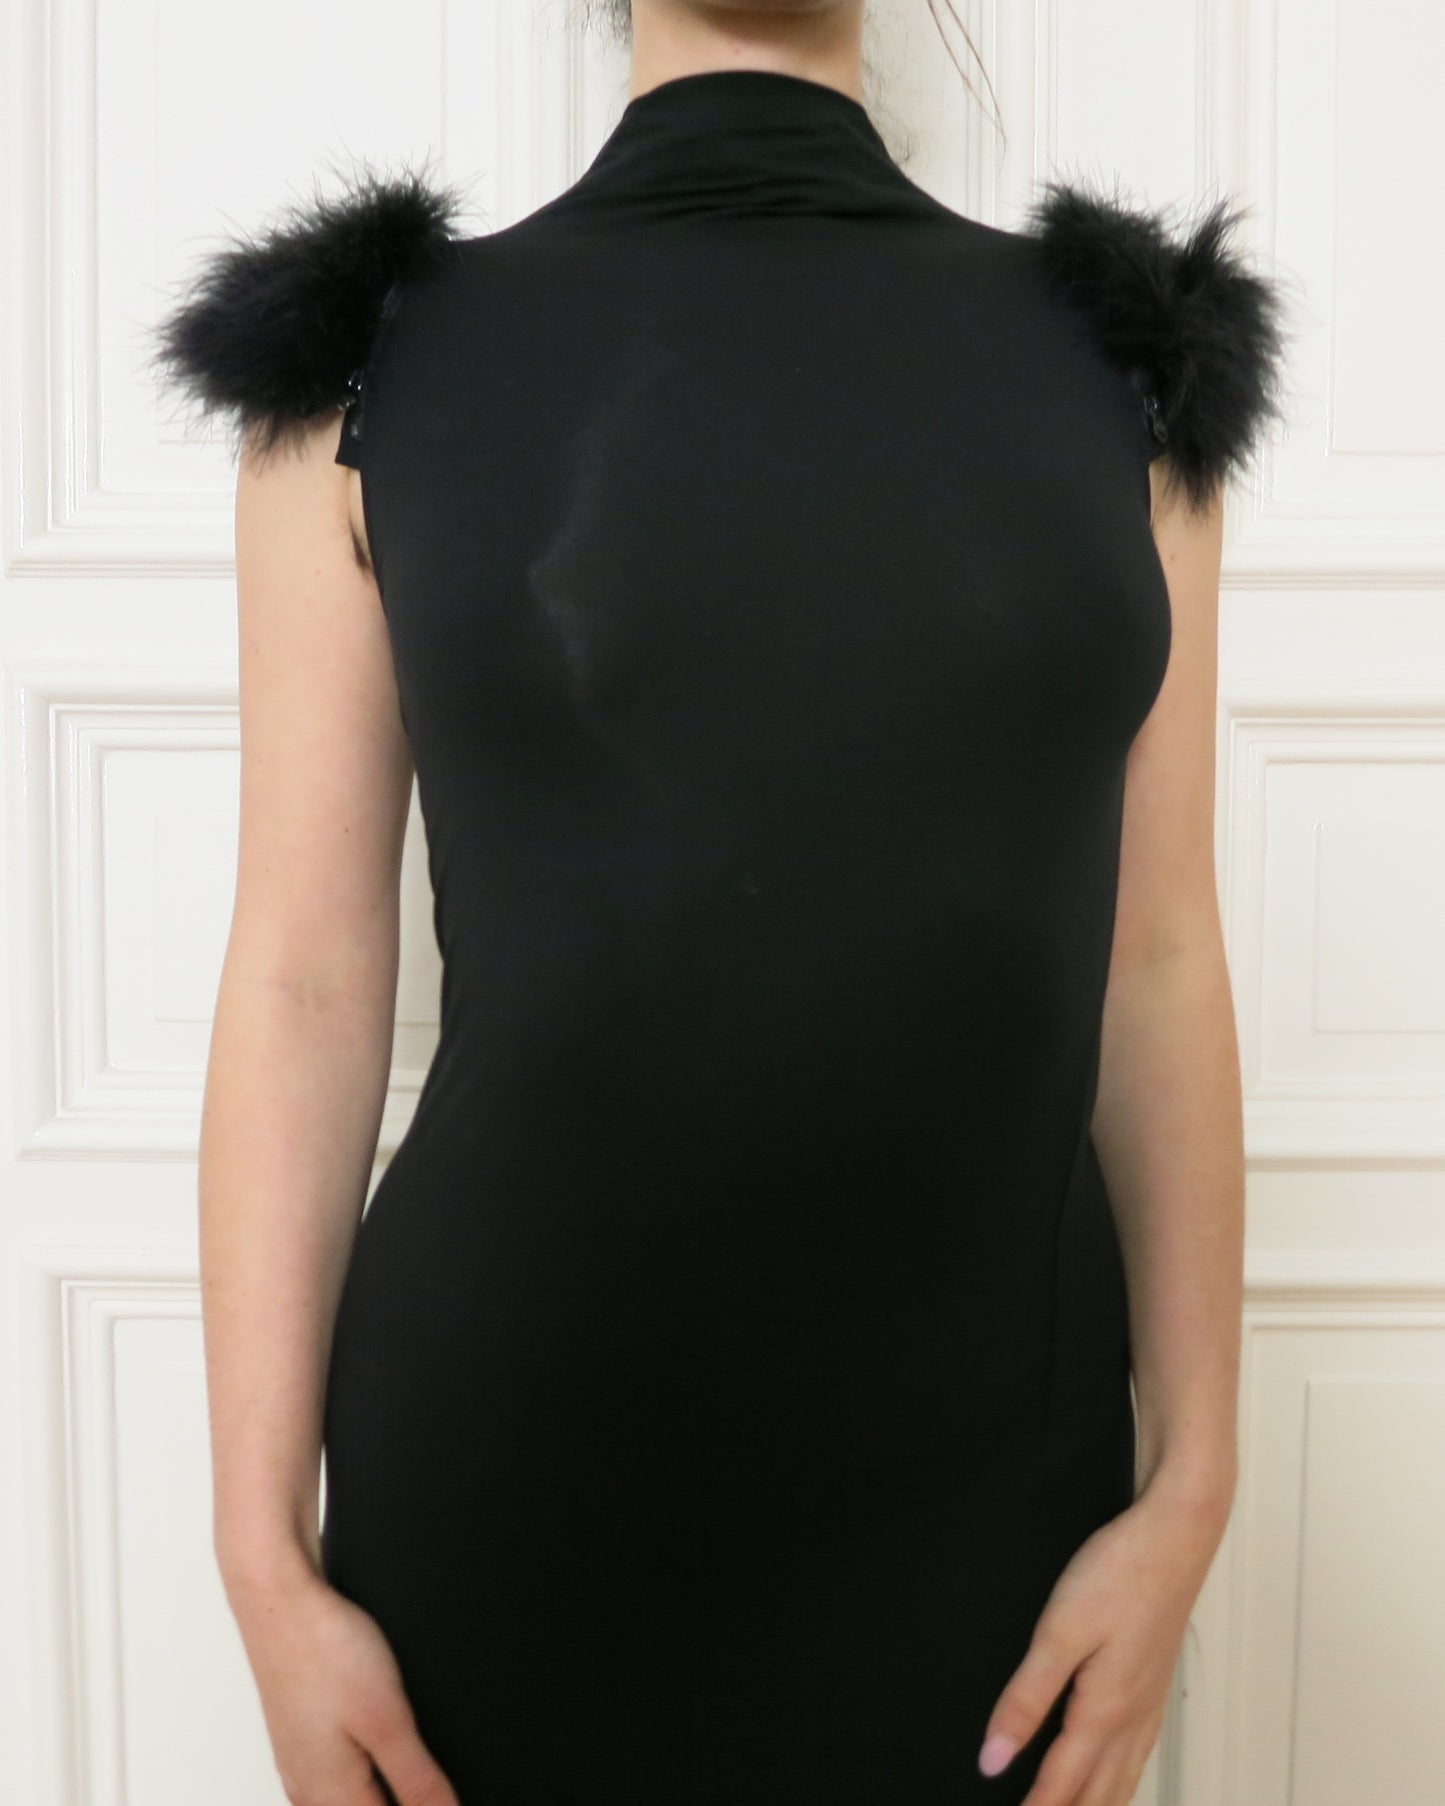 Black evening gown with feathers